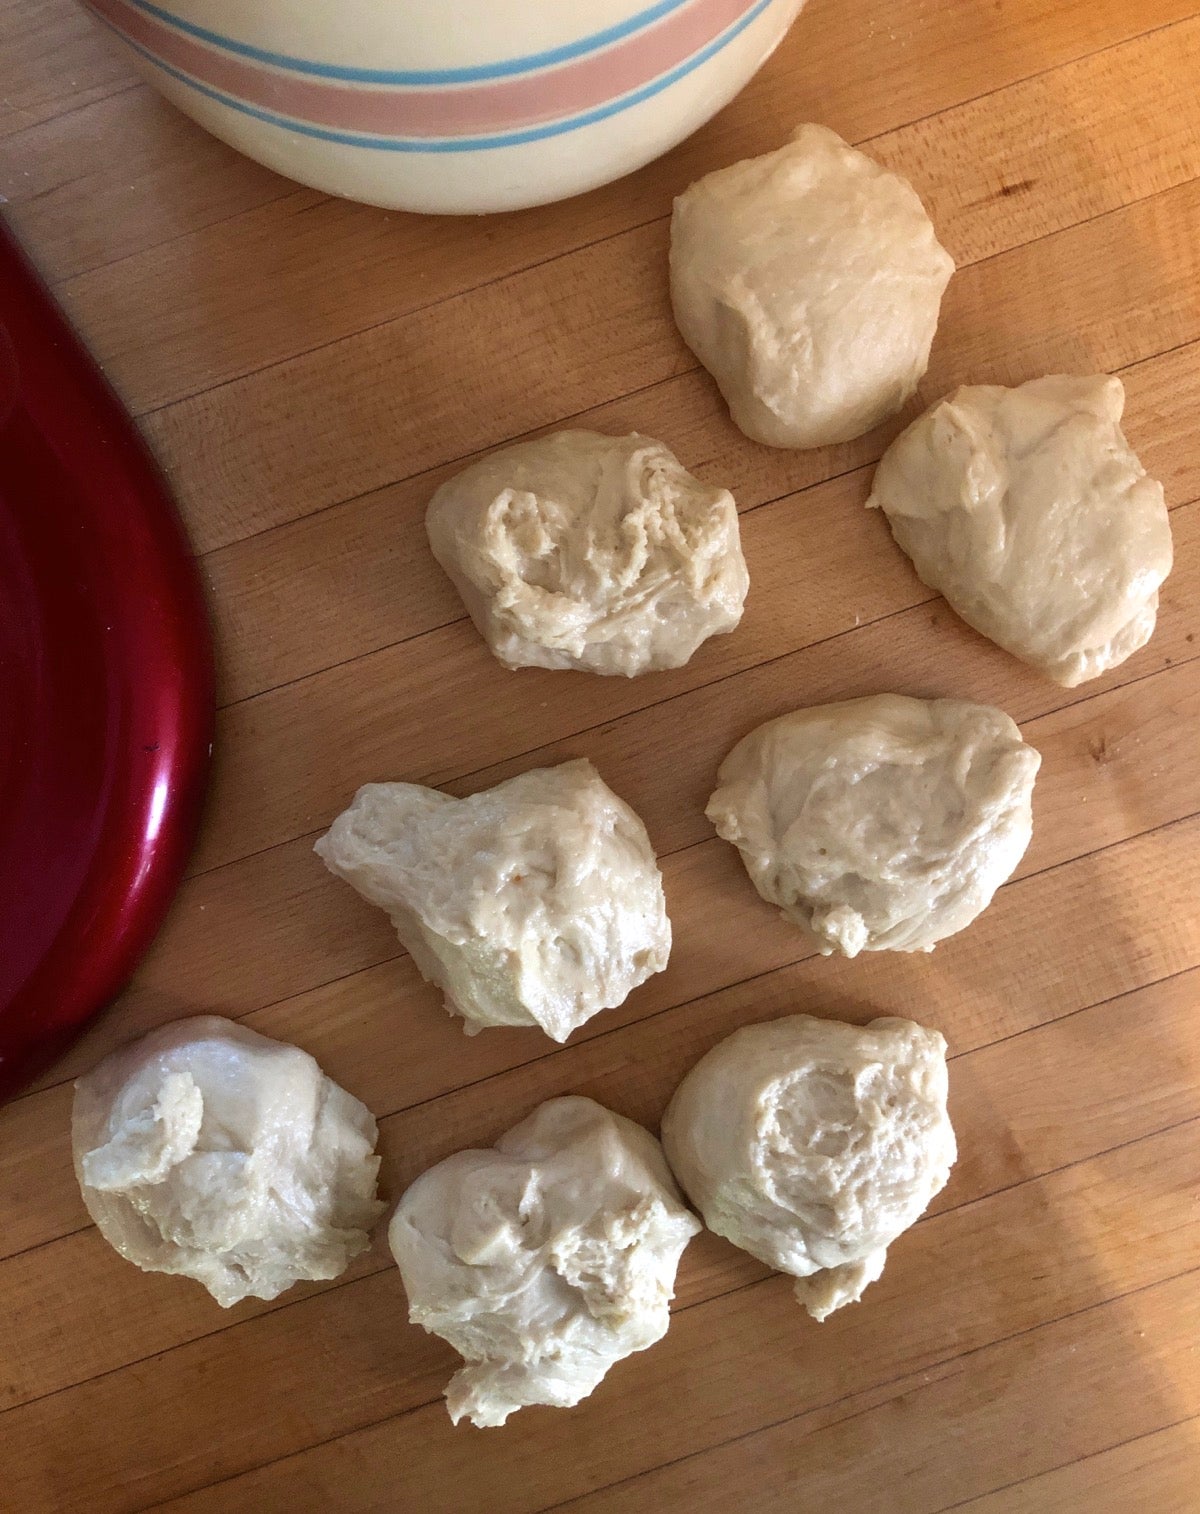 Eight rough pieces of dough sitting on a wooden table, waiting to be shaped into perfect round balls.